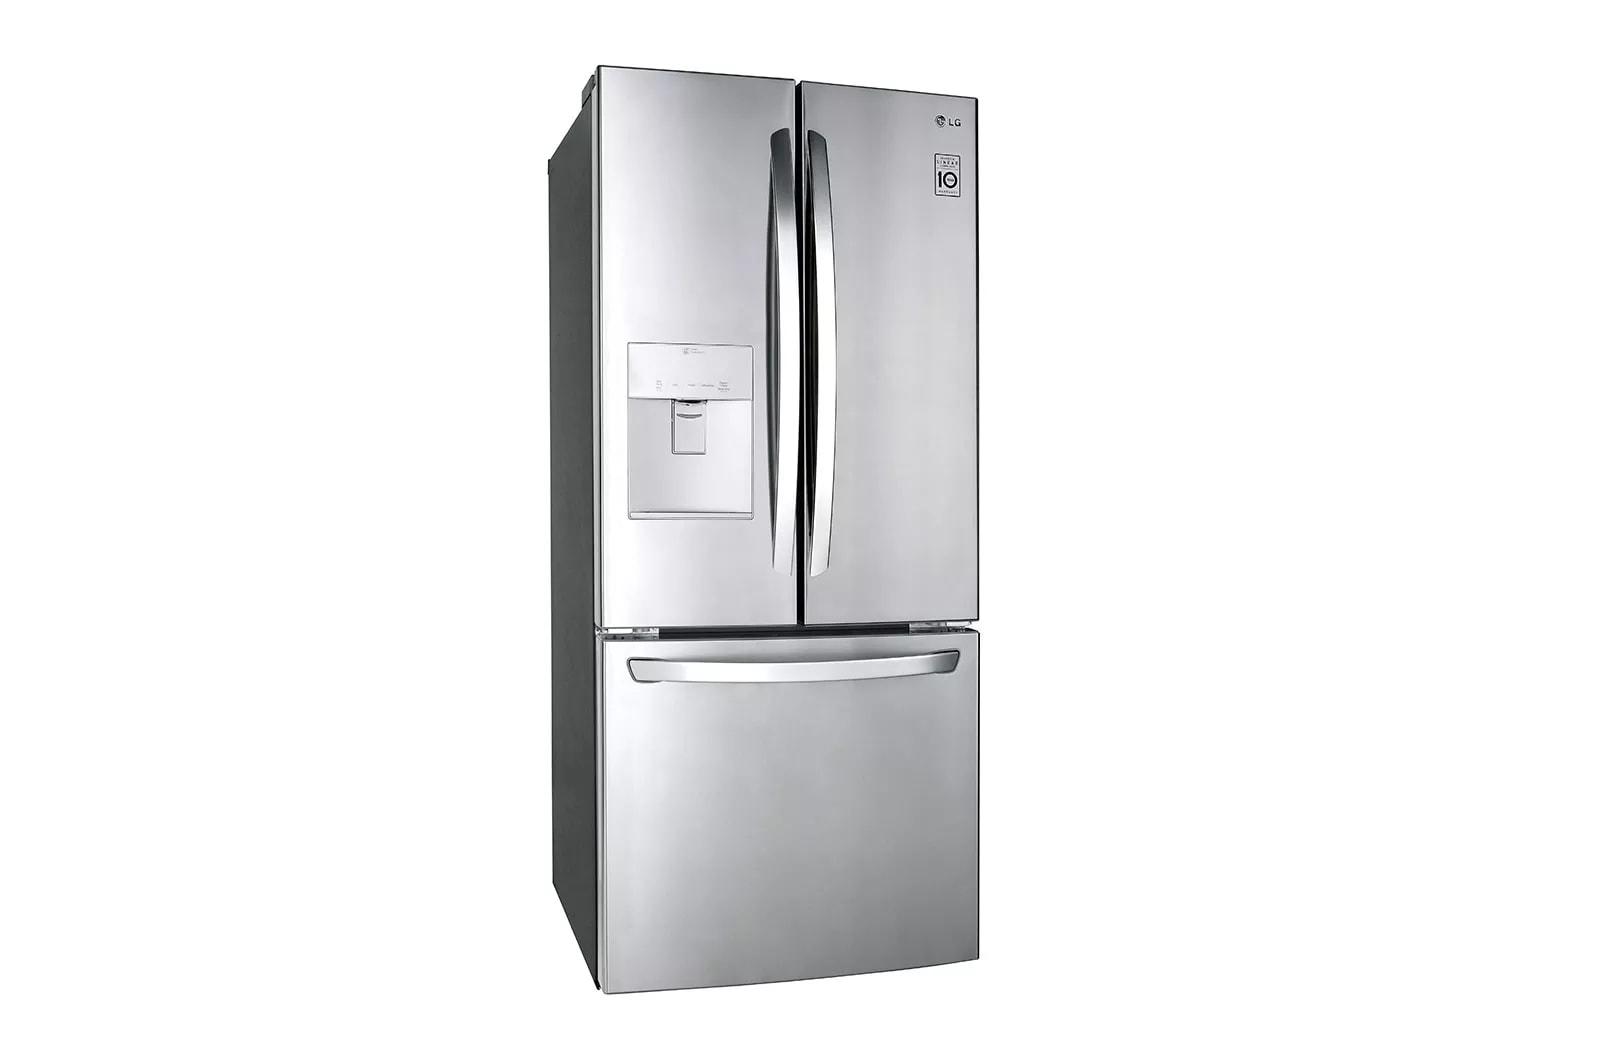 LG LFDS22520S 22 Cu. Ft. Stainless French Door Refrigerator - image 2 of 5